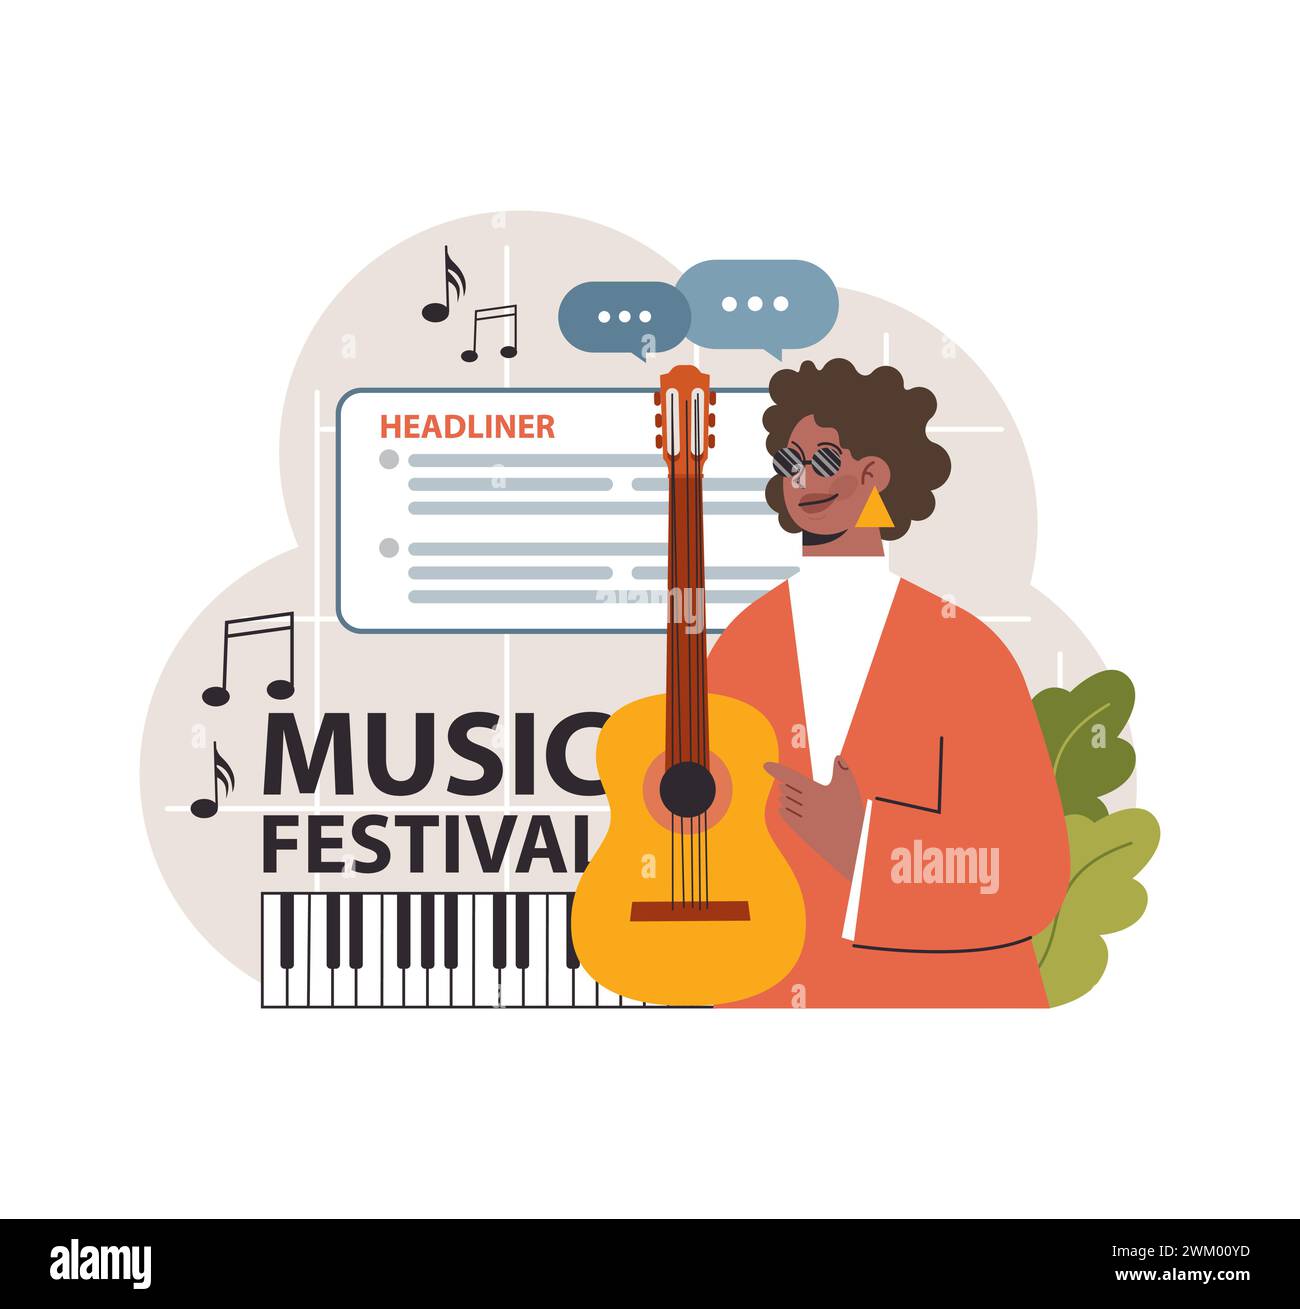 Musician grinning with her guitar, ready to be the headliner at the Music Festival. Notes float around as excitement builds for her performance. Flat vector illustration Stock Vector